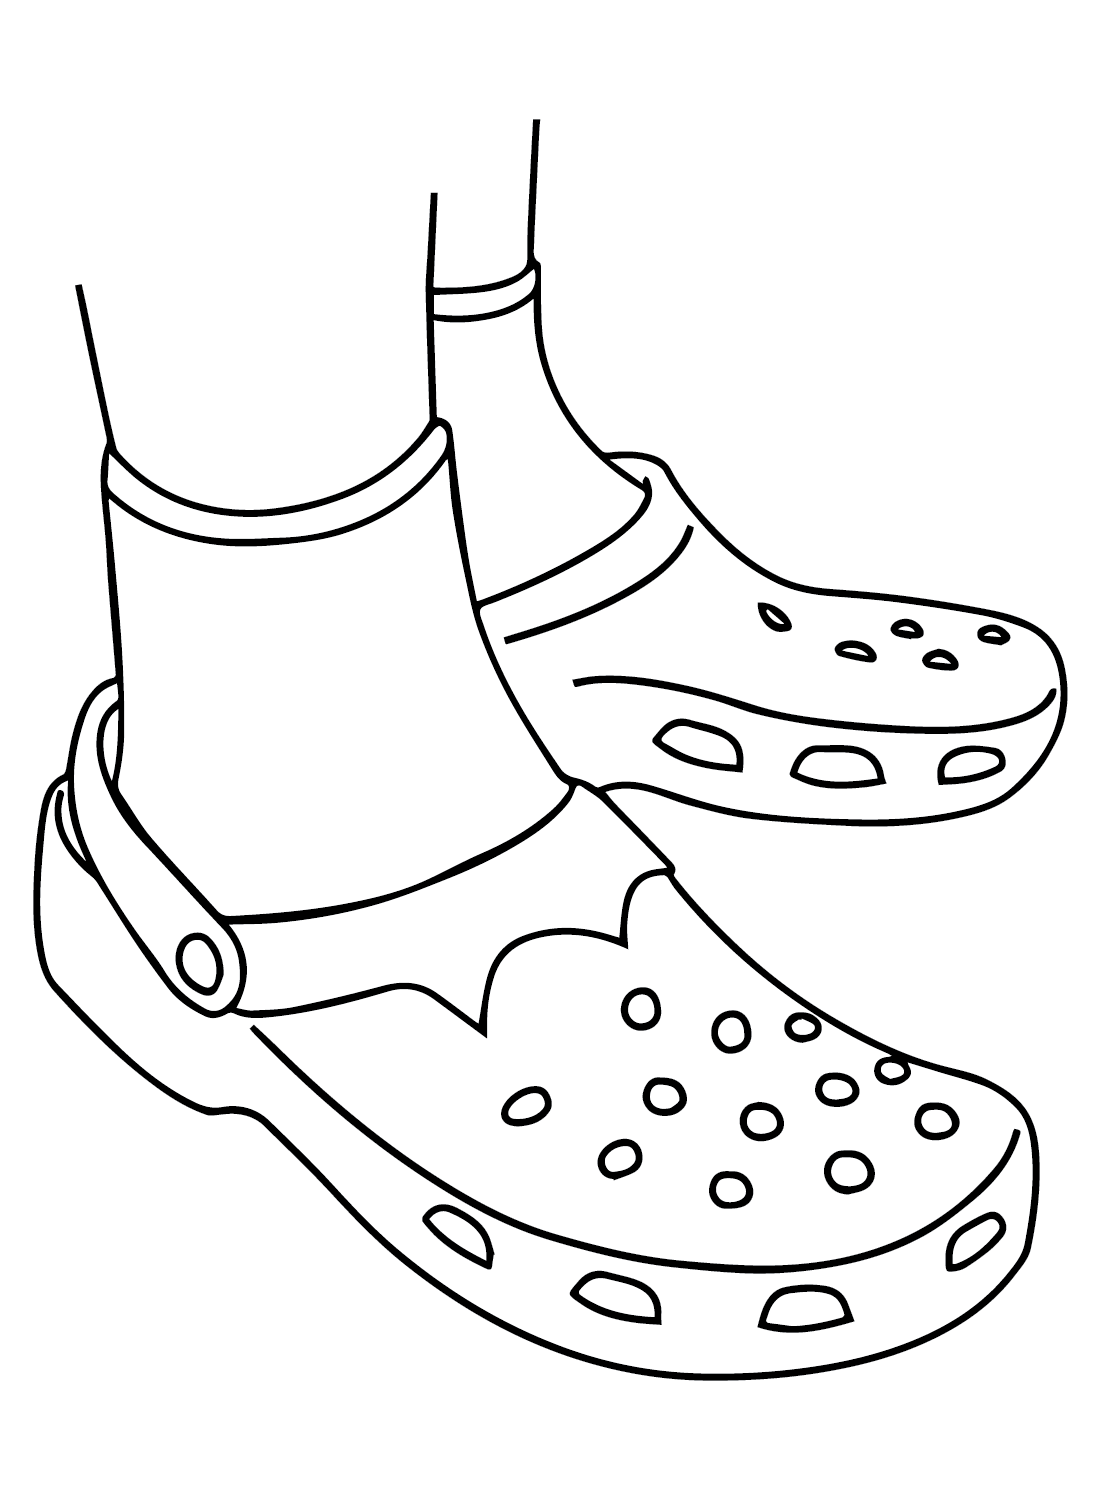 Crocs Coloring Pages Printable for Free Download